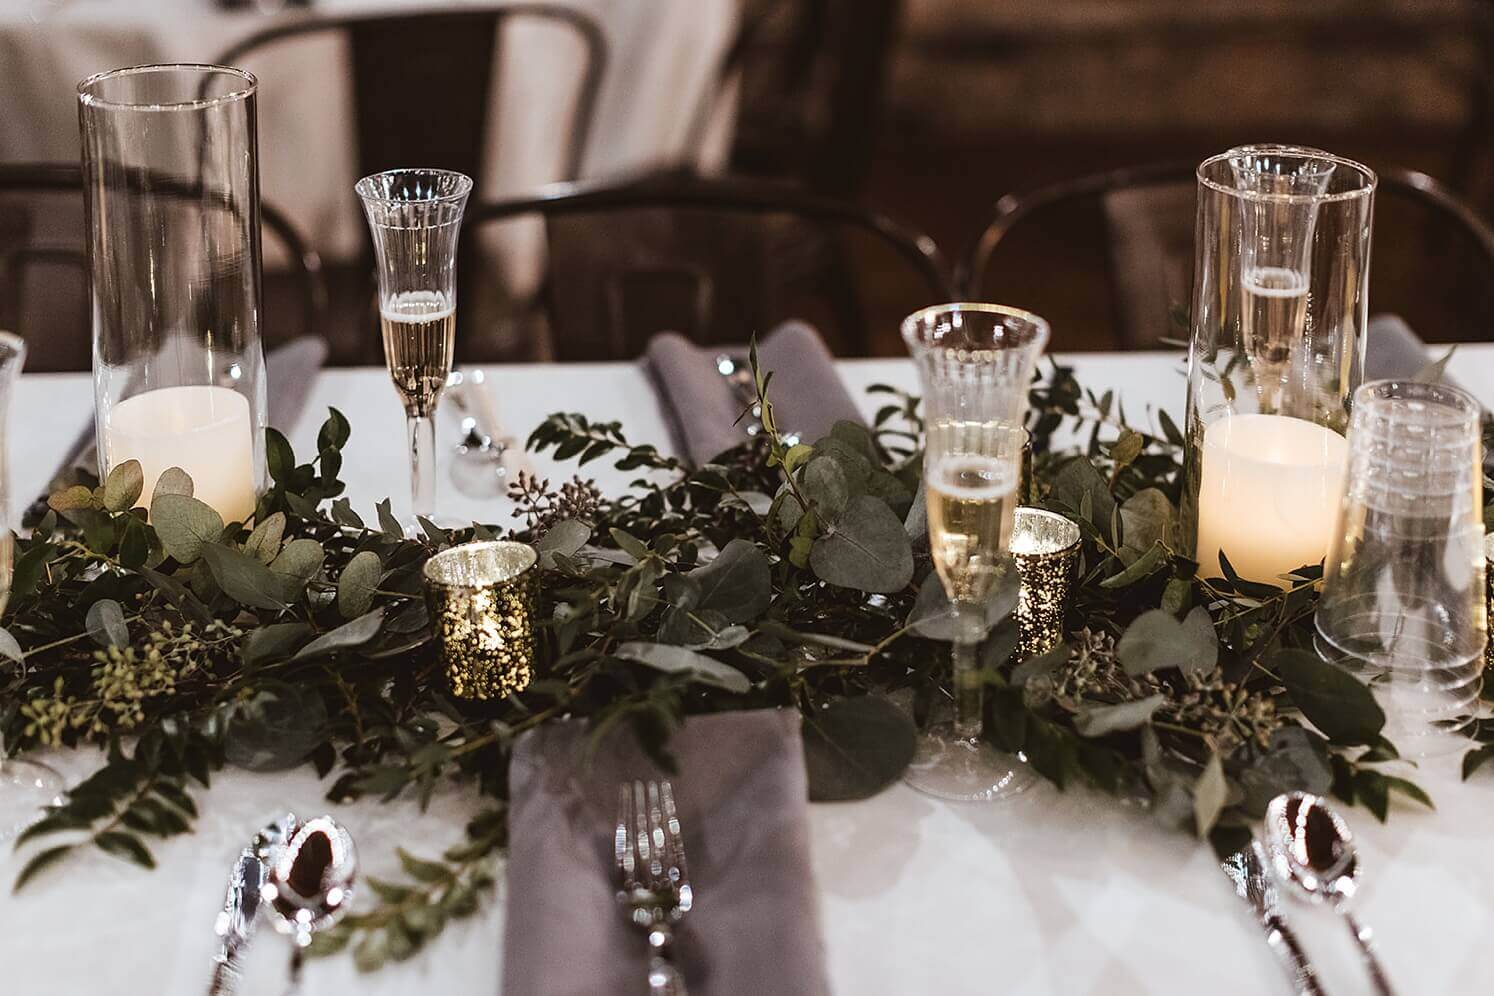 Greenery and candles reception decor at winter wedding venue